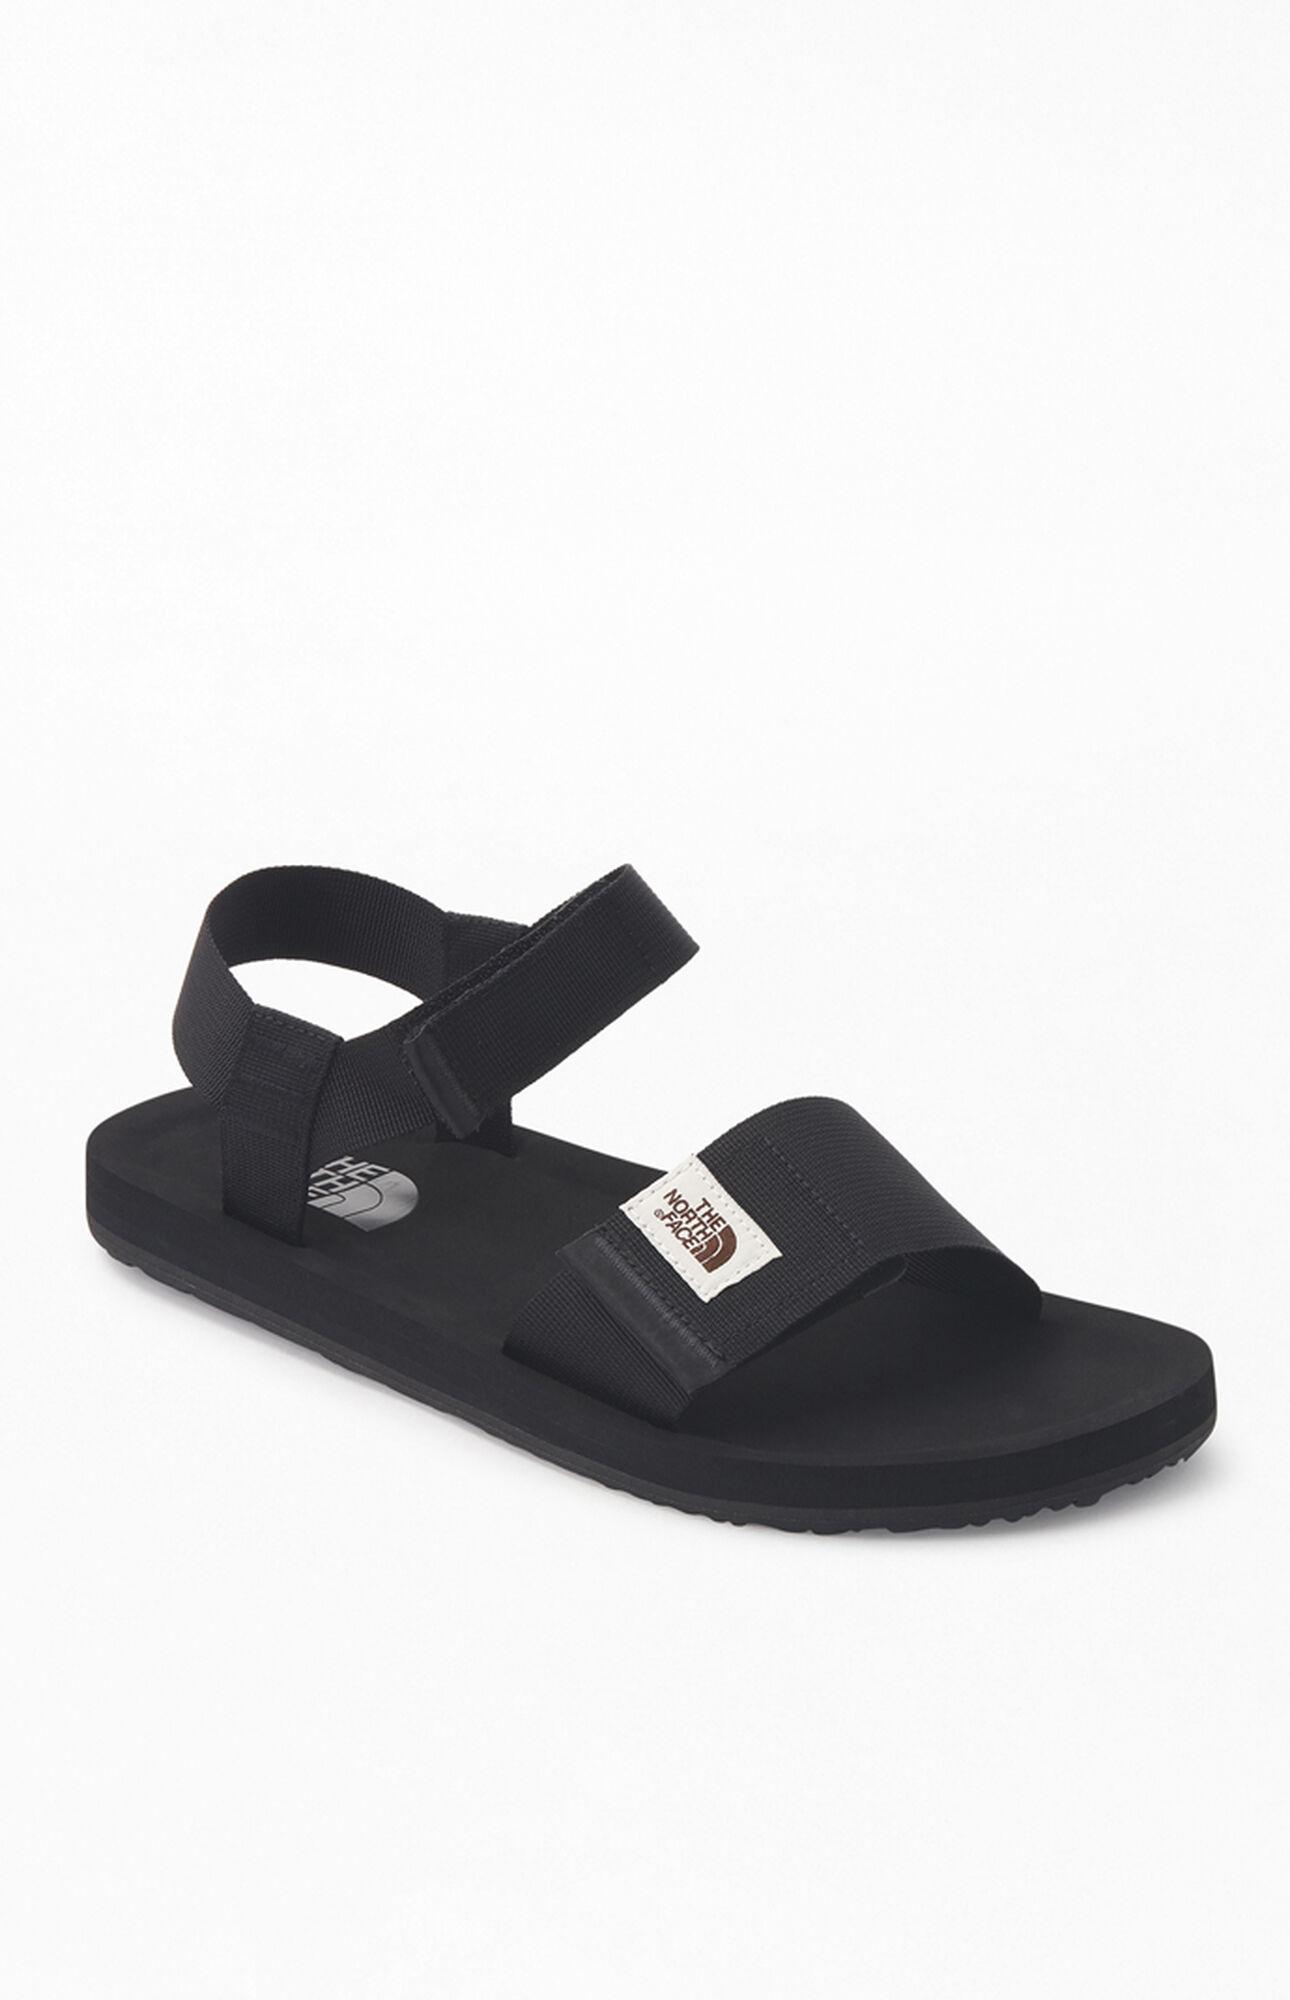 The North Face Synthetic Skeena Sandals in Black for Men - Lyst